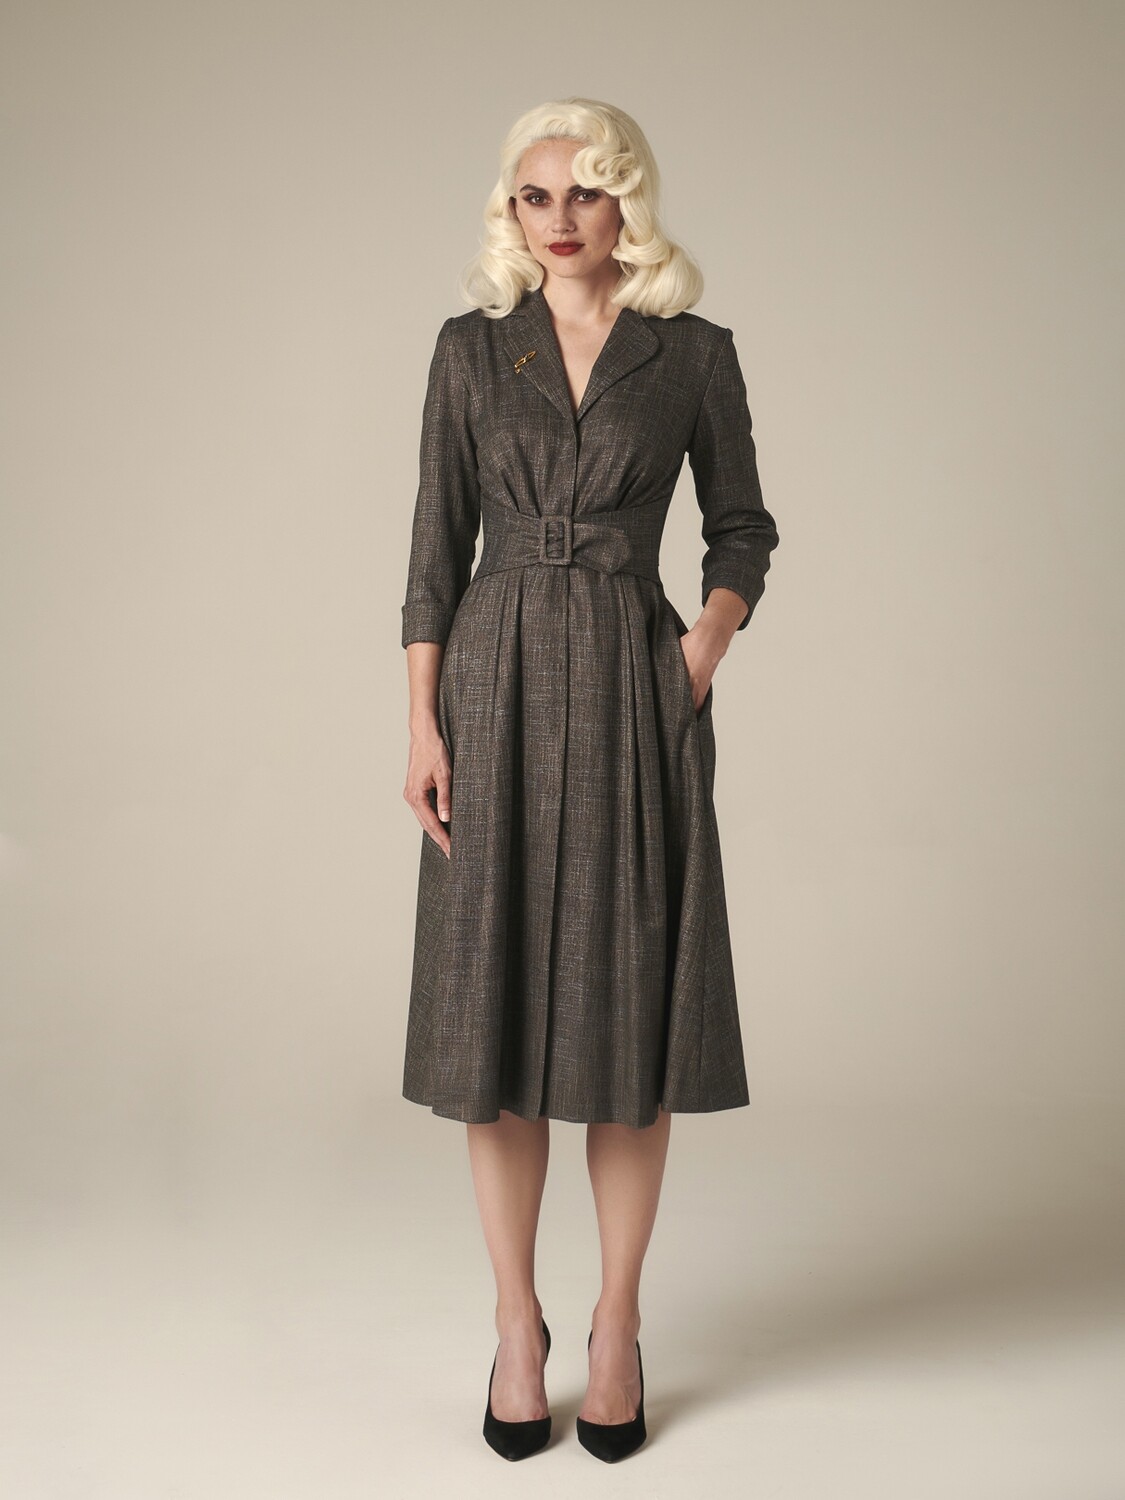 A-line silhouette "Day Dress"